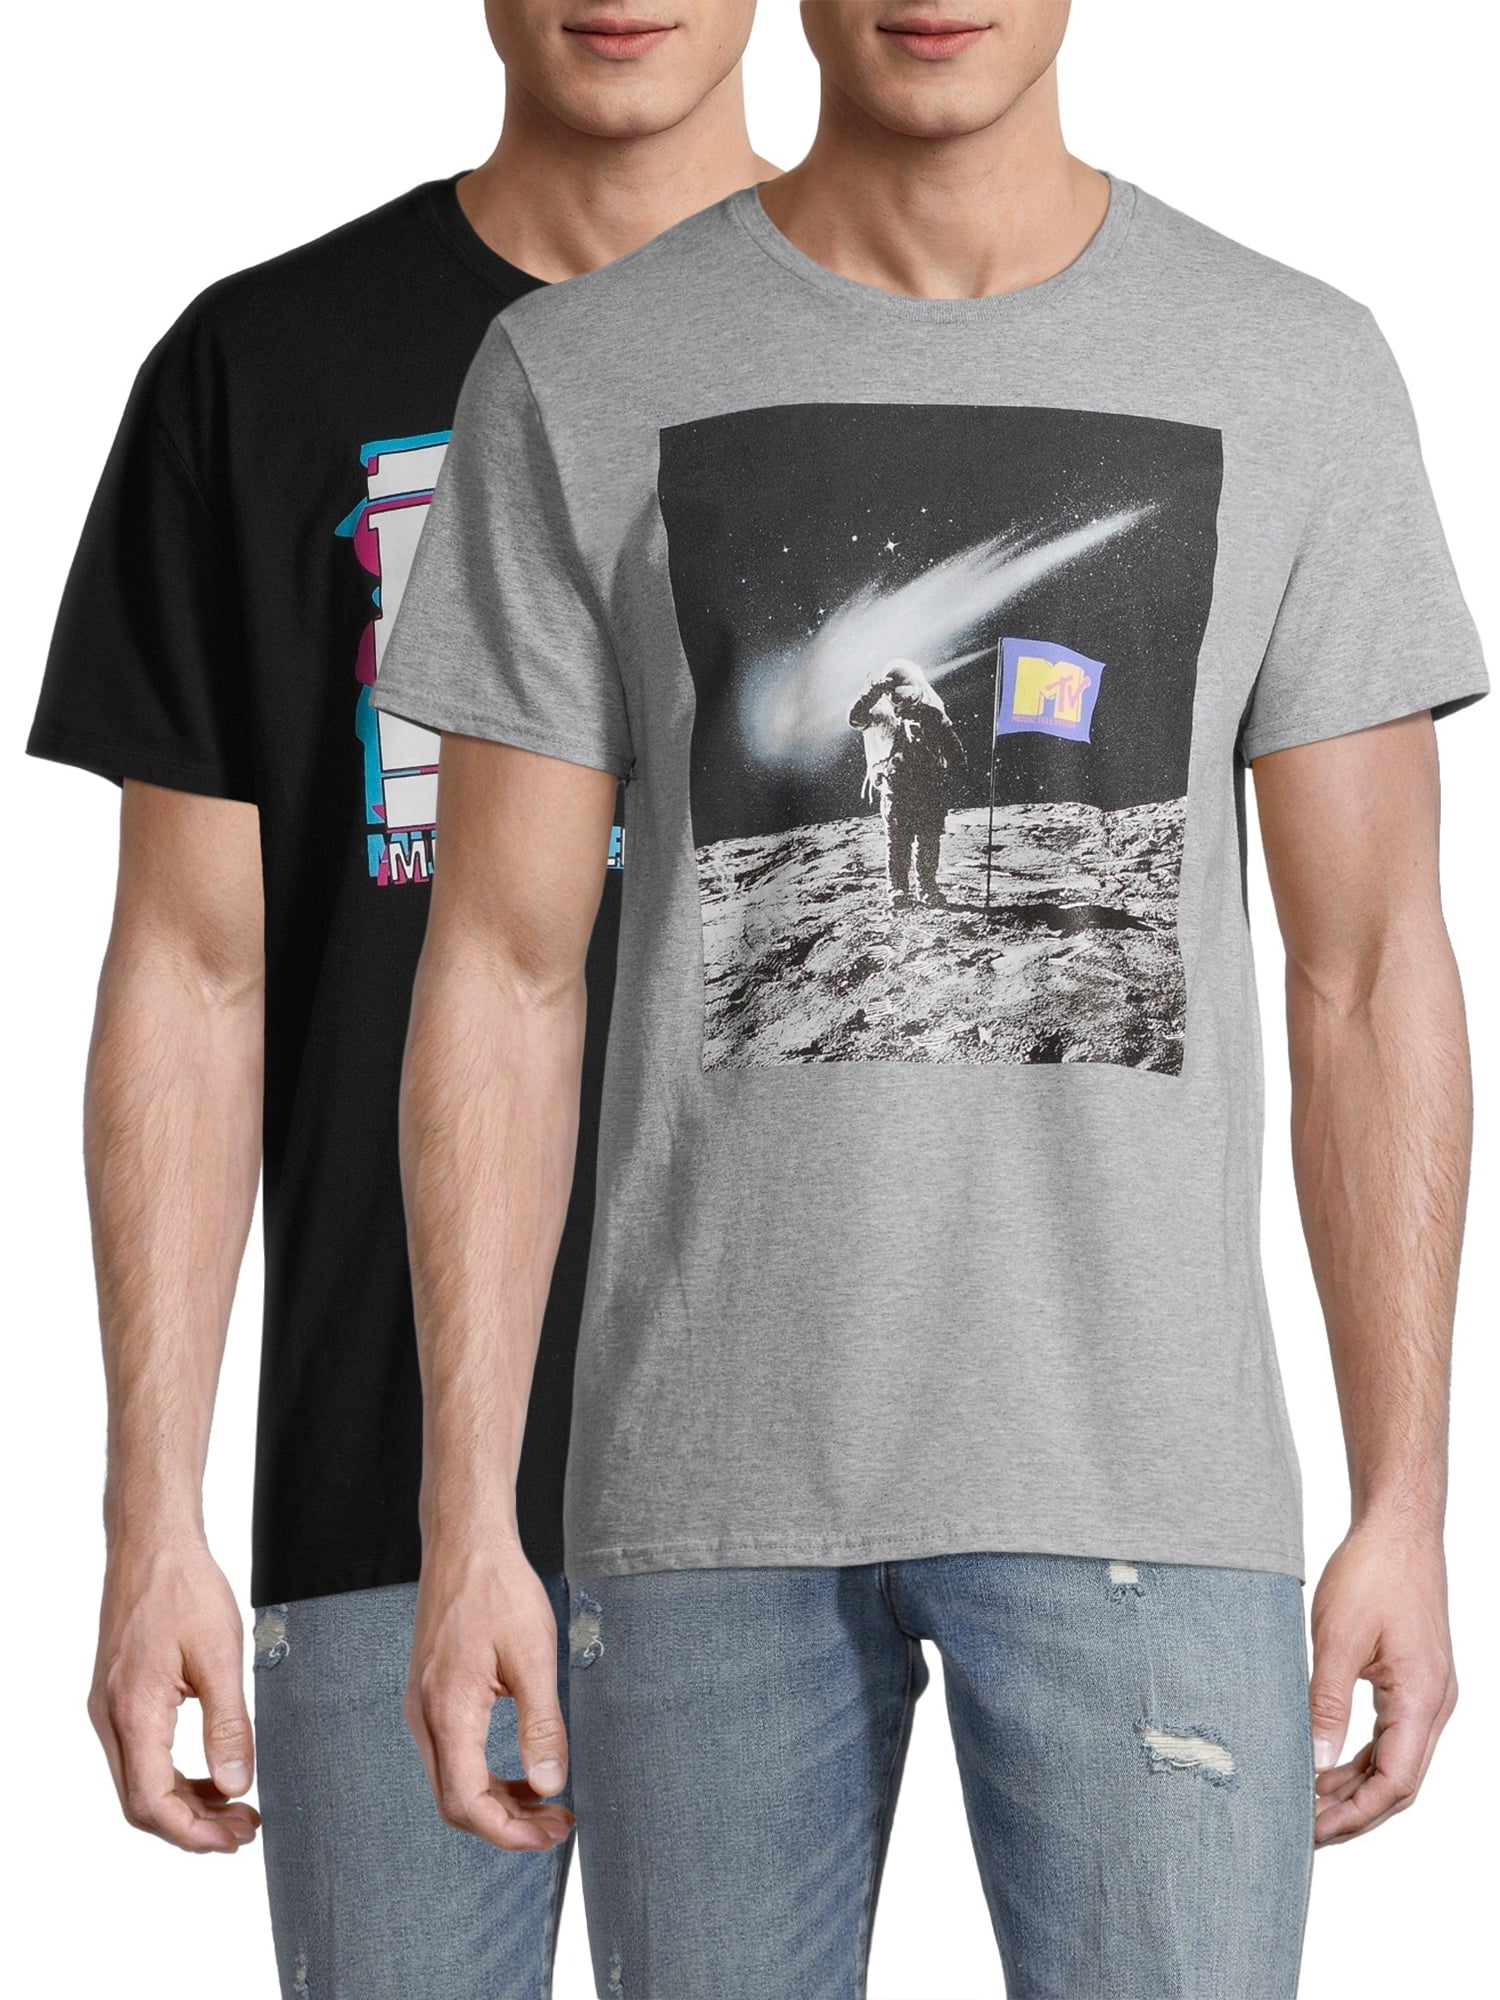 ET Extra Terrestrial Movie Bicycle MOON SCENE BOYS & GIRLS T-Shirt S-XL E.T 